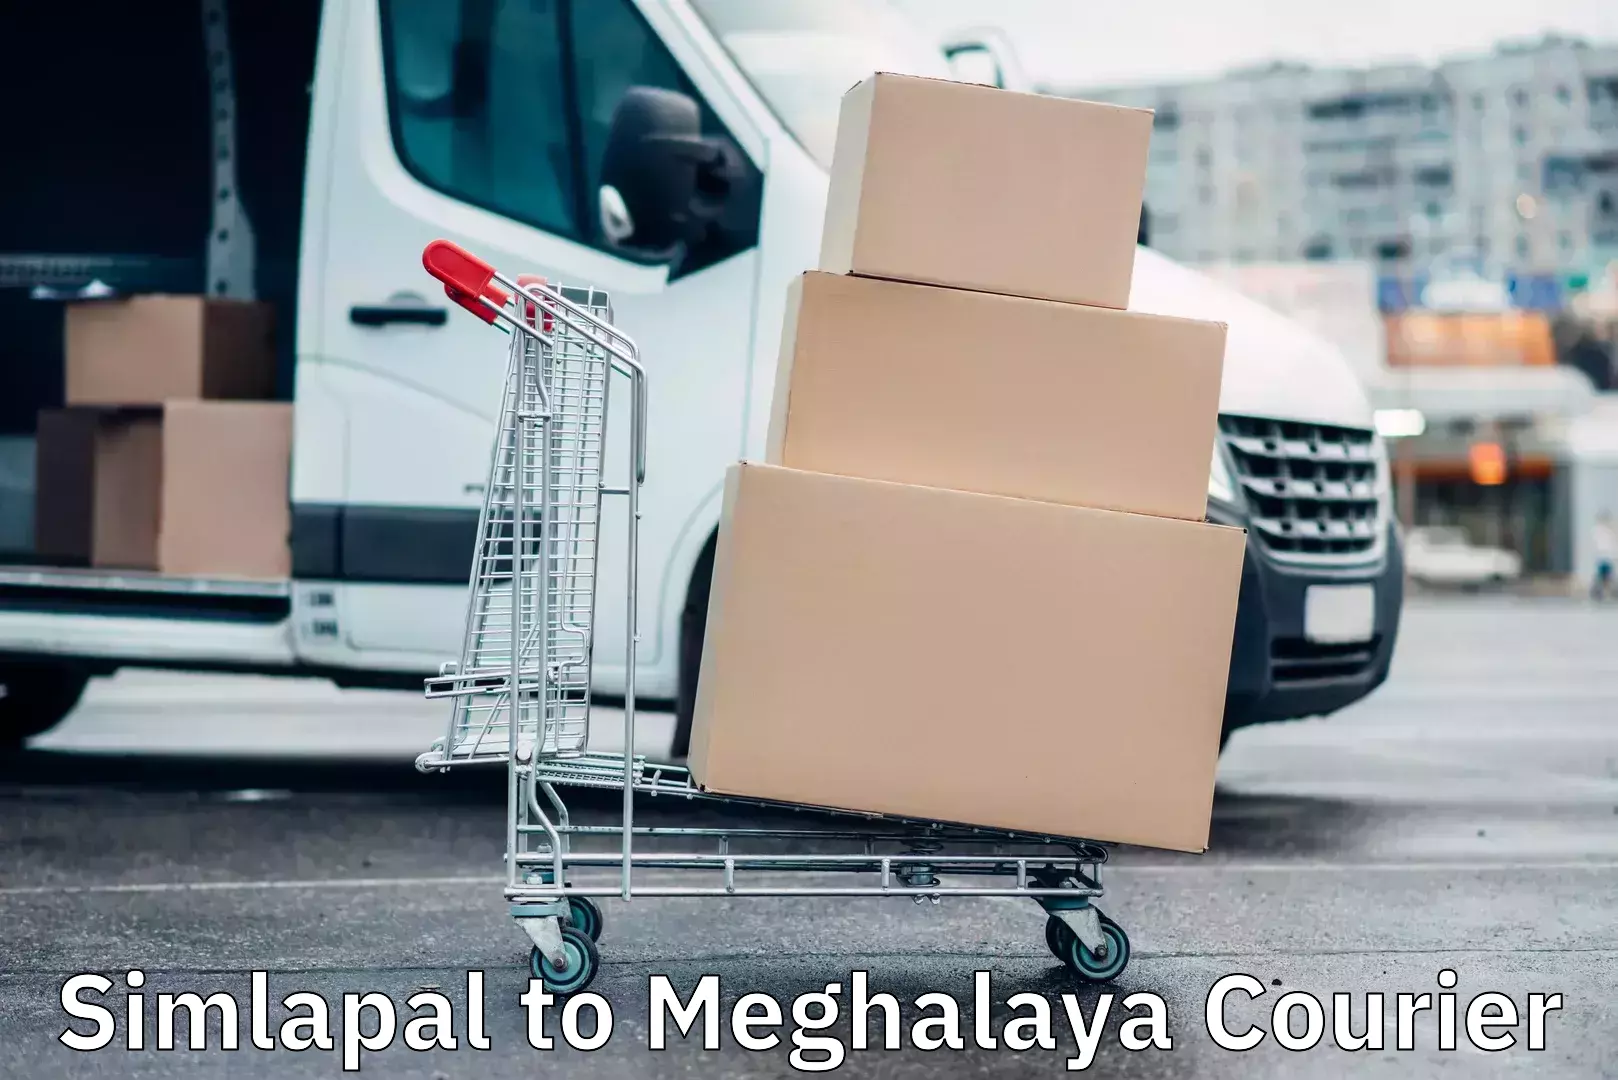 24-hour courier service in Simlapal to Meghalaya